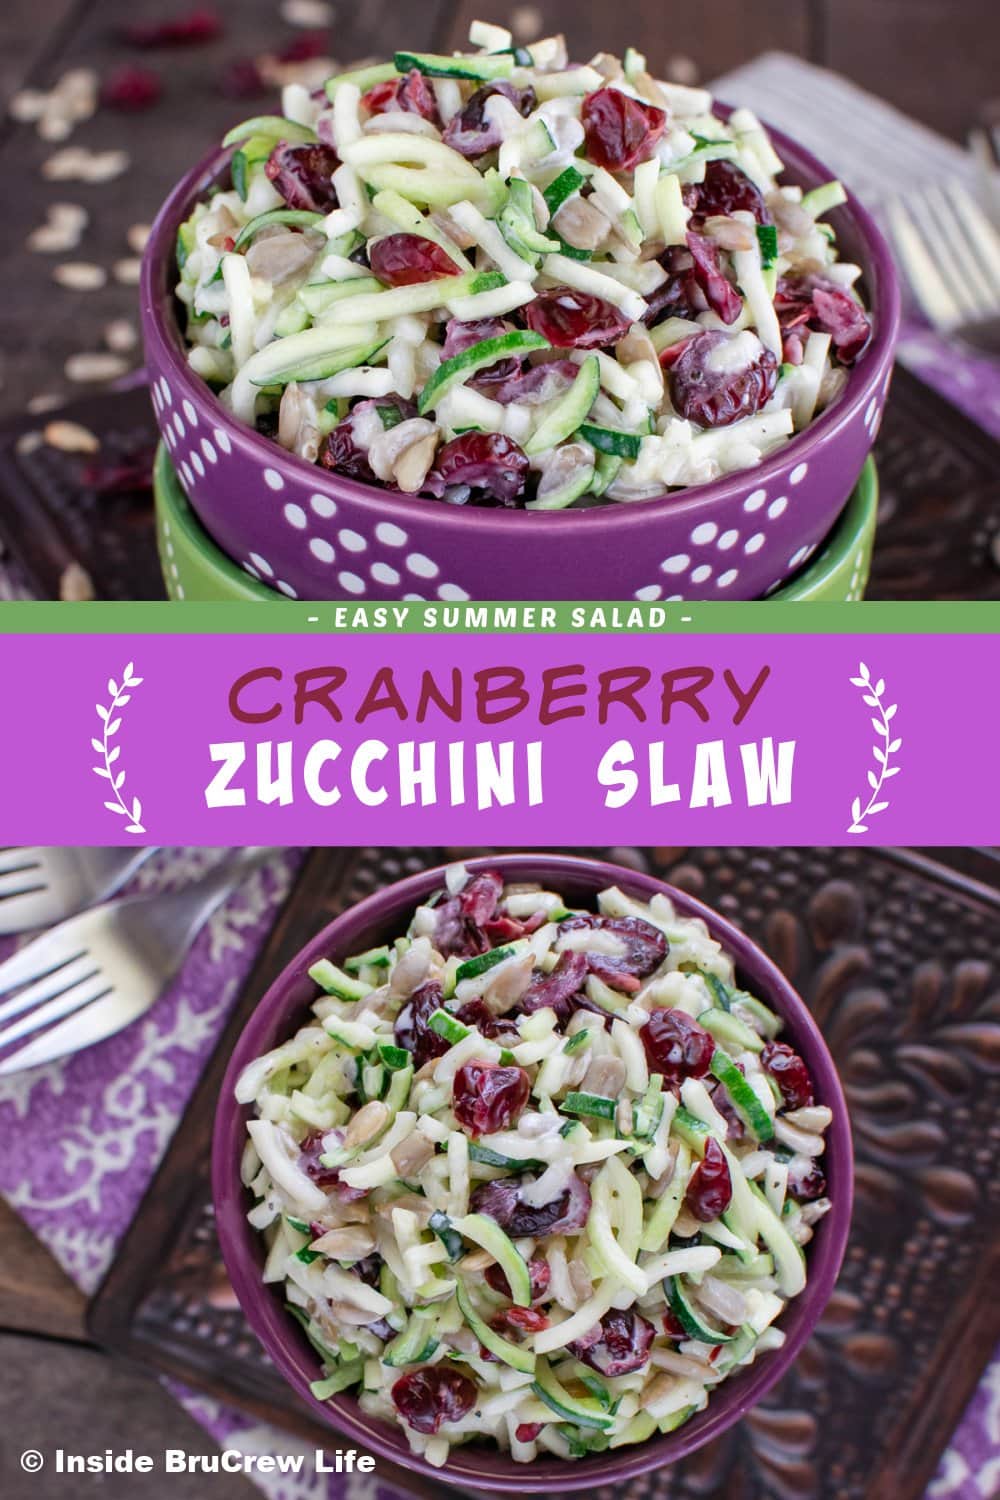 Two pictures of zucchini slaw collaged together with a purple text box.